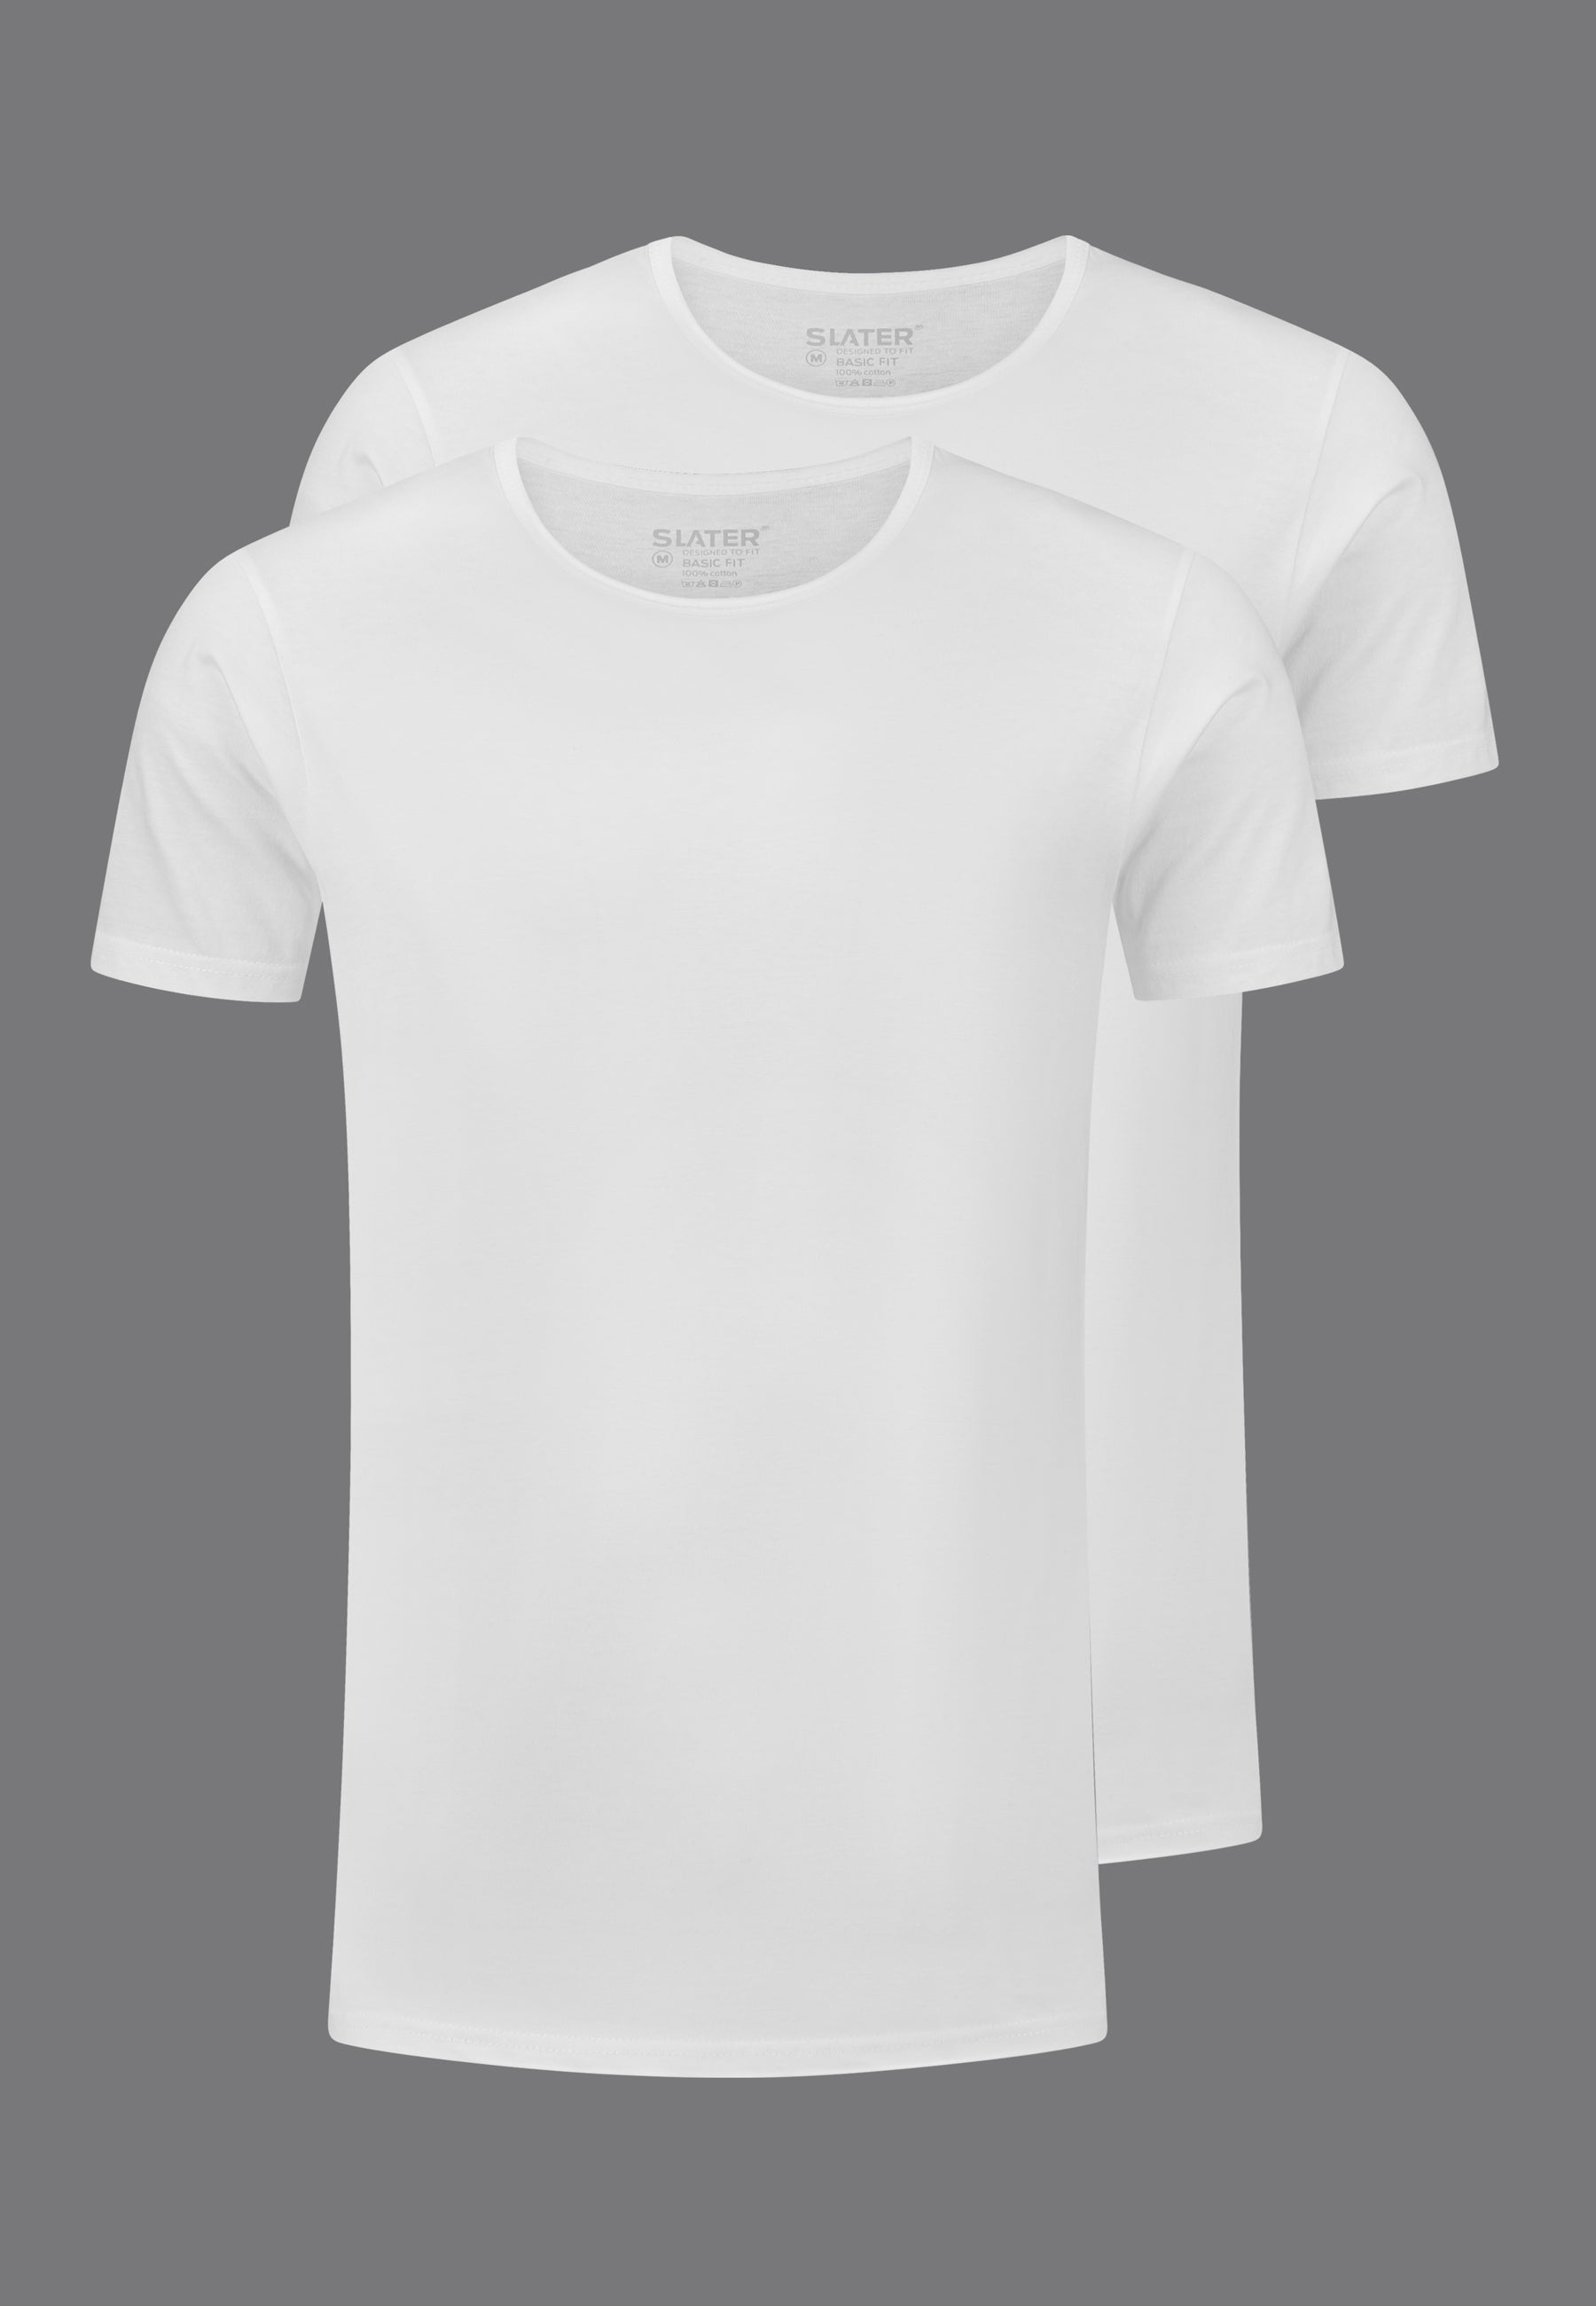 Vertolking Kan niet archief Basic Fit extra Long Ronde Hals T-shirt - Wit (+7cm) - Slaterstore